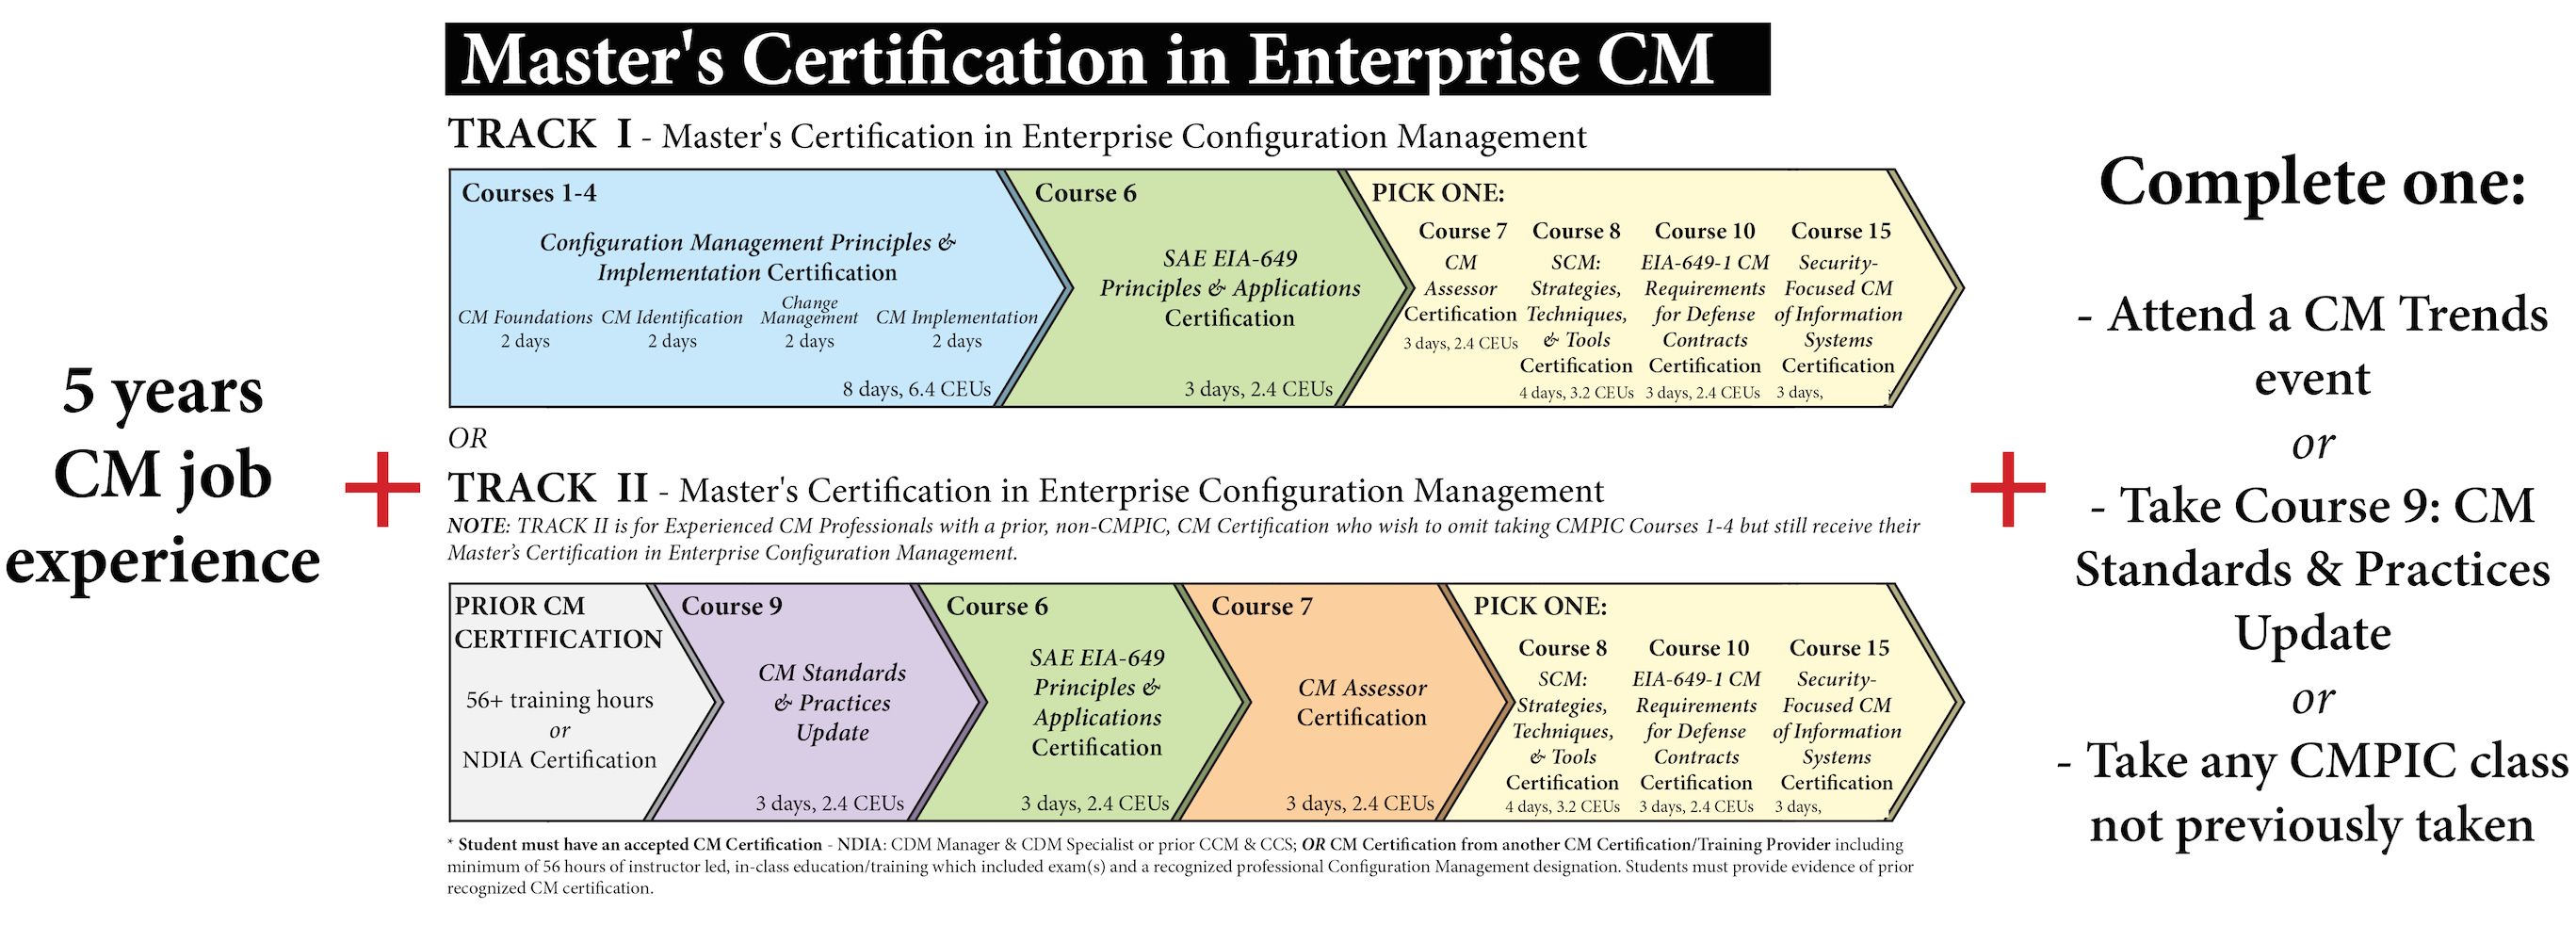 Overview of CMSME program class requirements - 5 years CM job experience + CMPIC Master's certification + additional ongoing requirement.